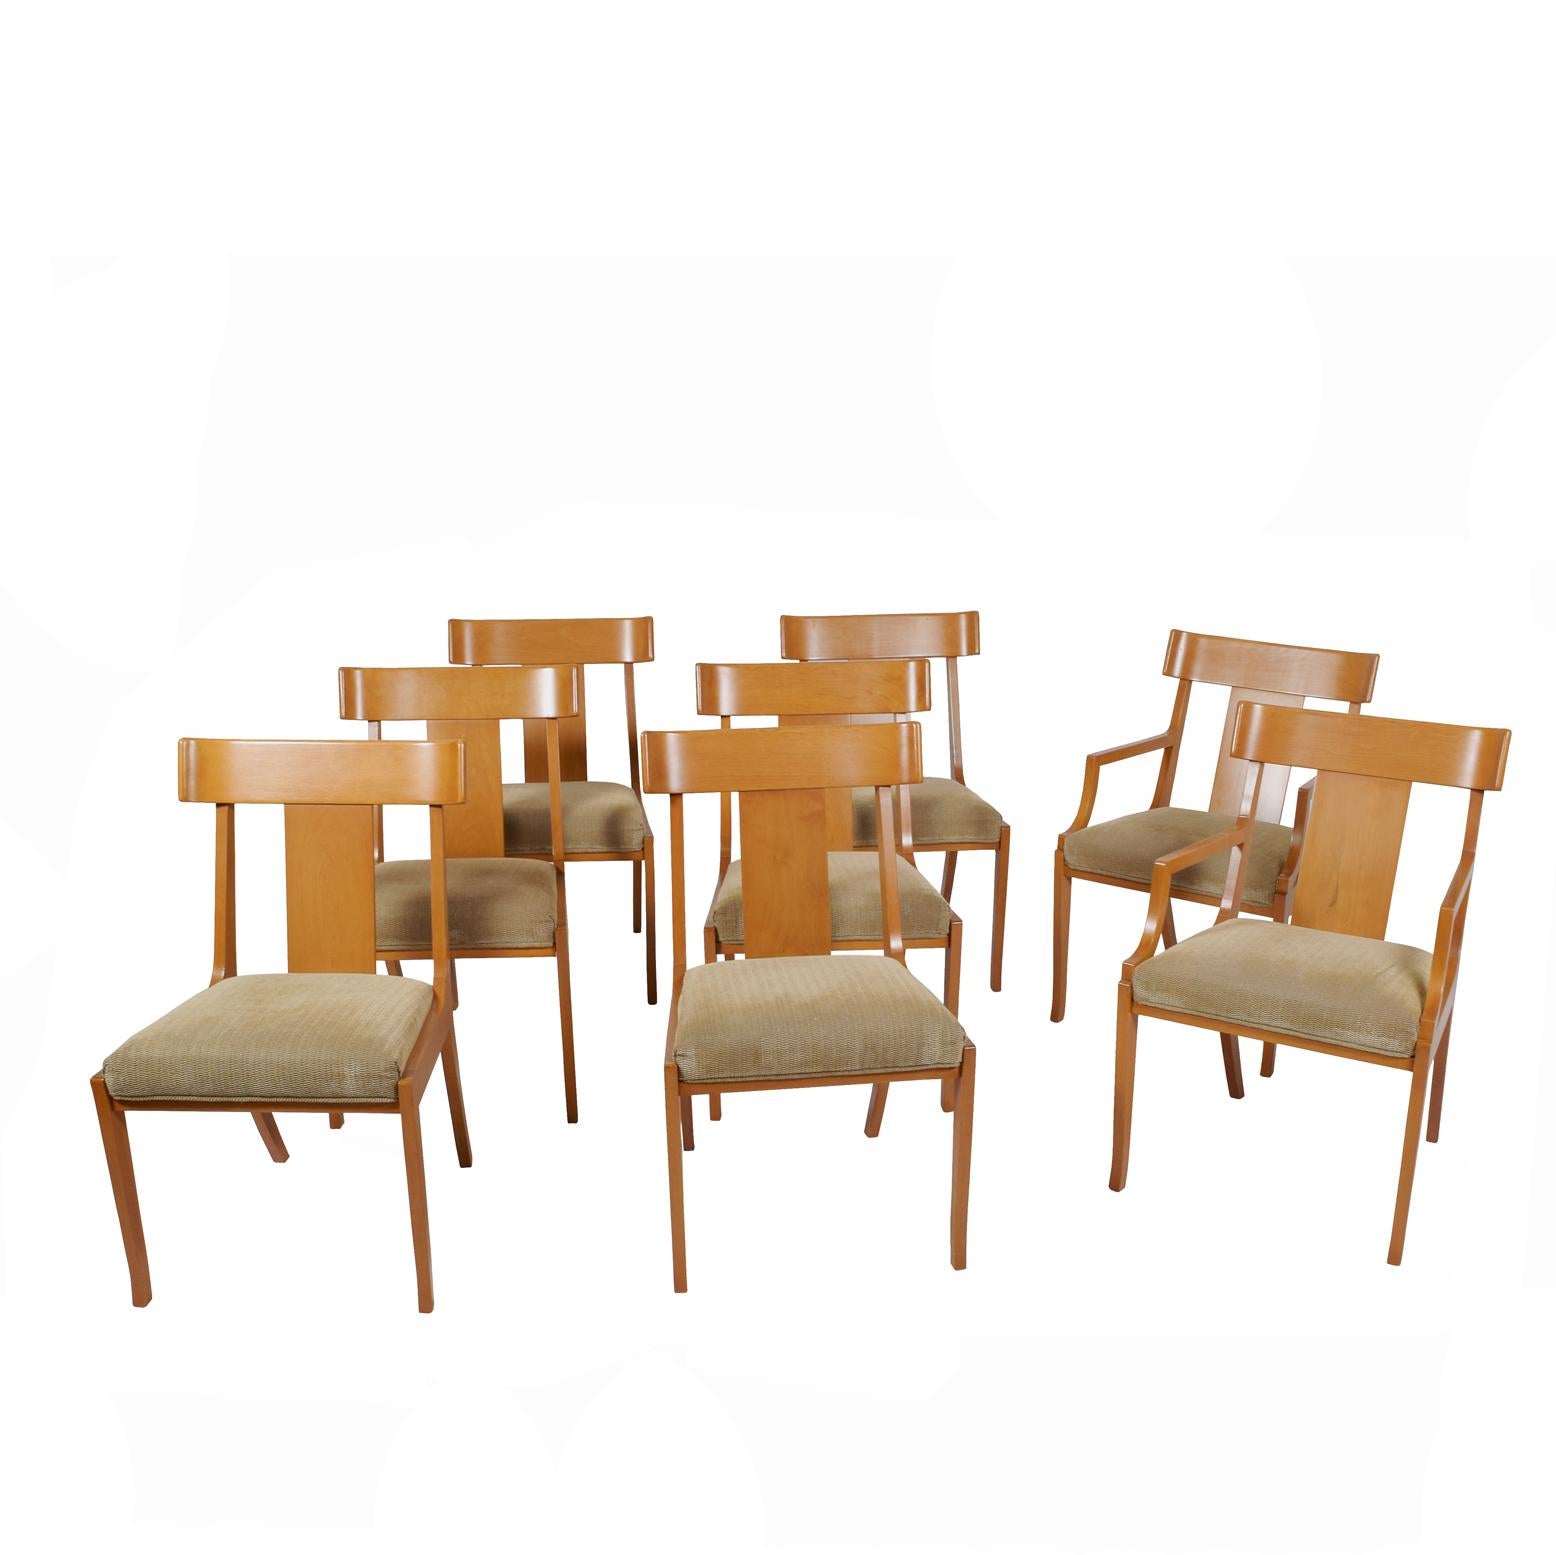 Two armchairs six side model #4204 design for Widdicomb in 1950s by T.H.Robsjohn-Gibbings. Inspired by klismos chairs.